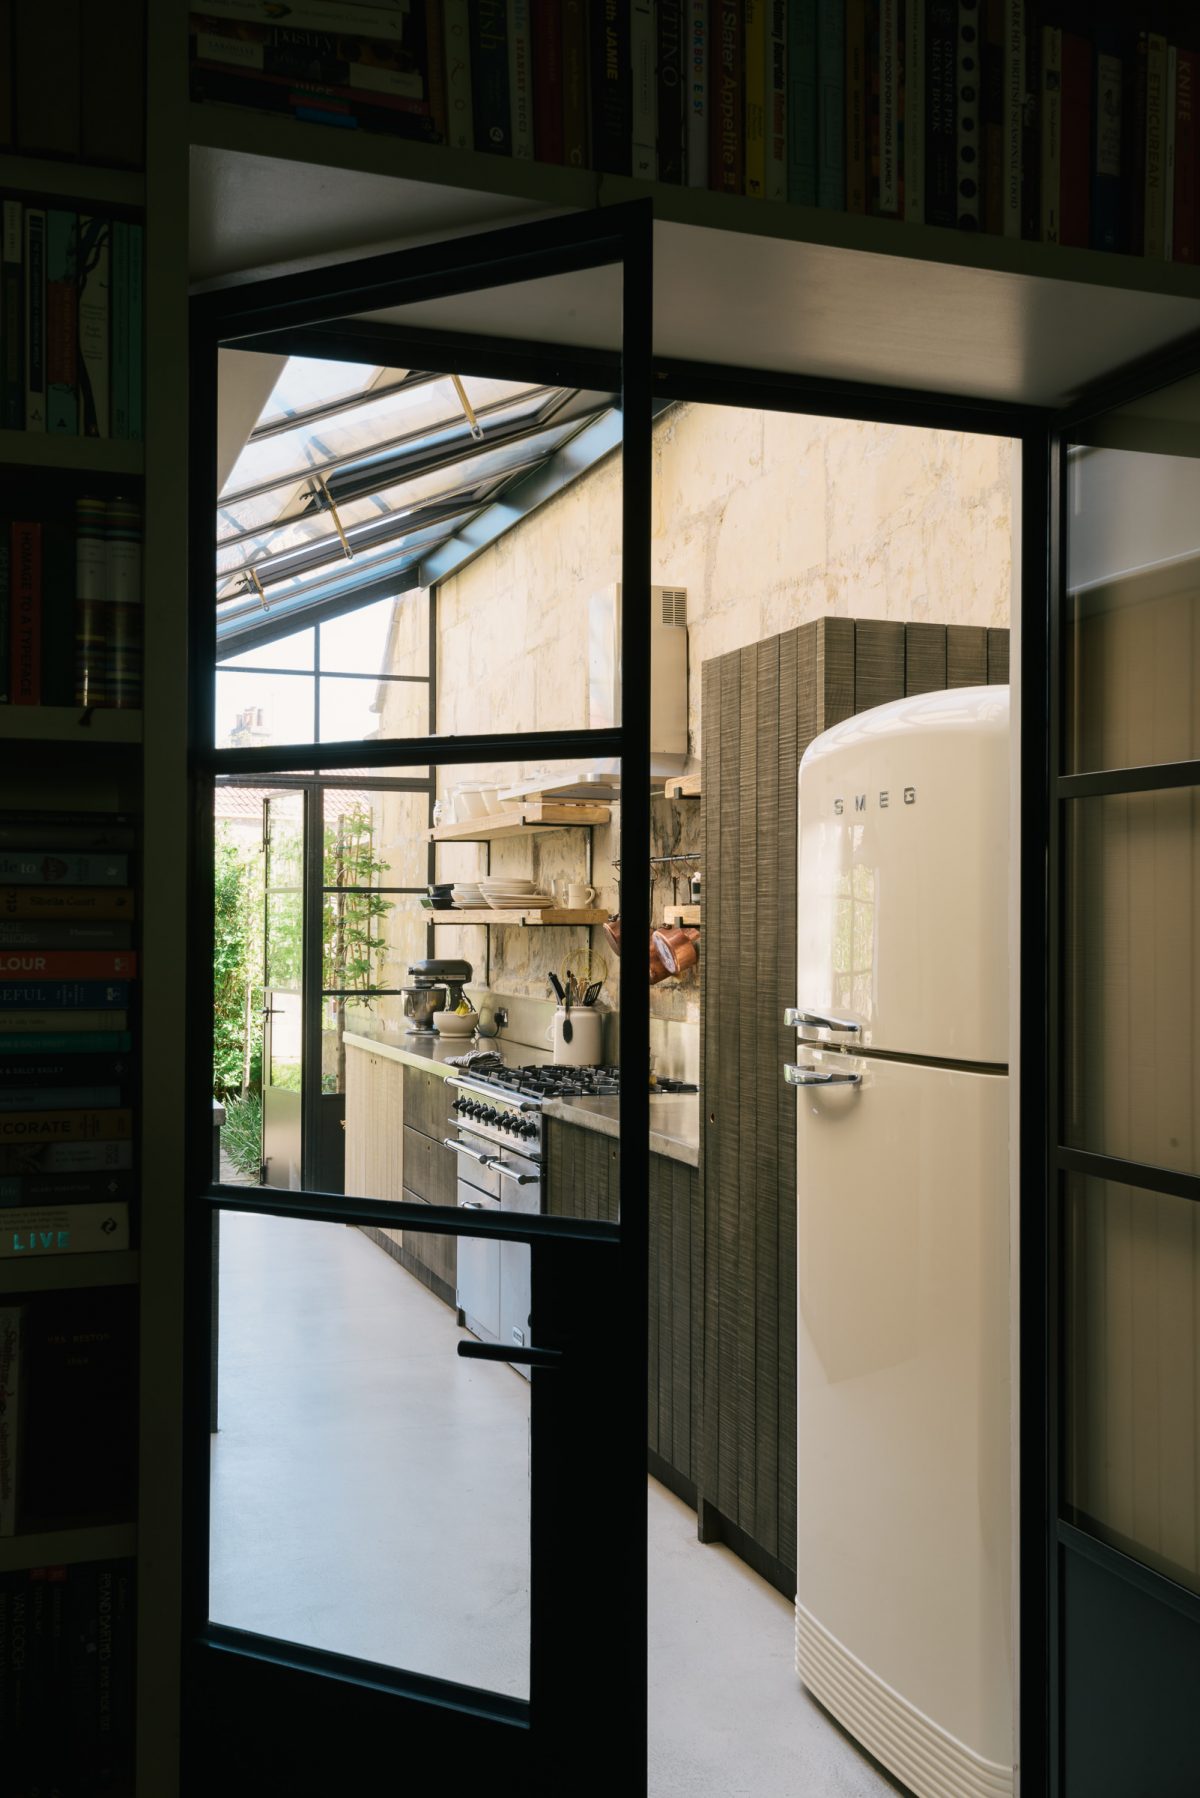 A view through Crittall-style doors into this cool Sebastian Cox Kitchen.